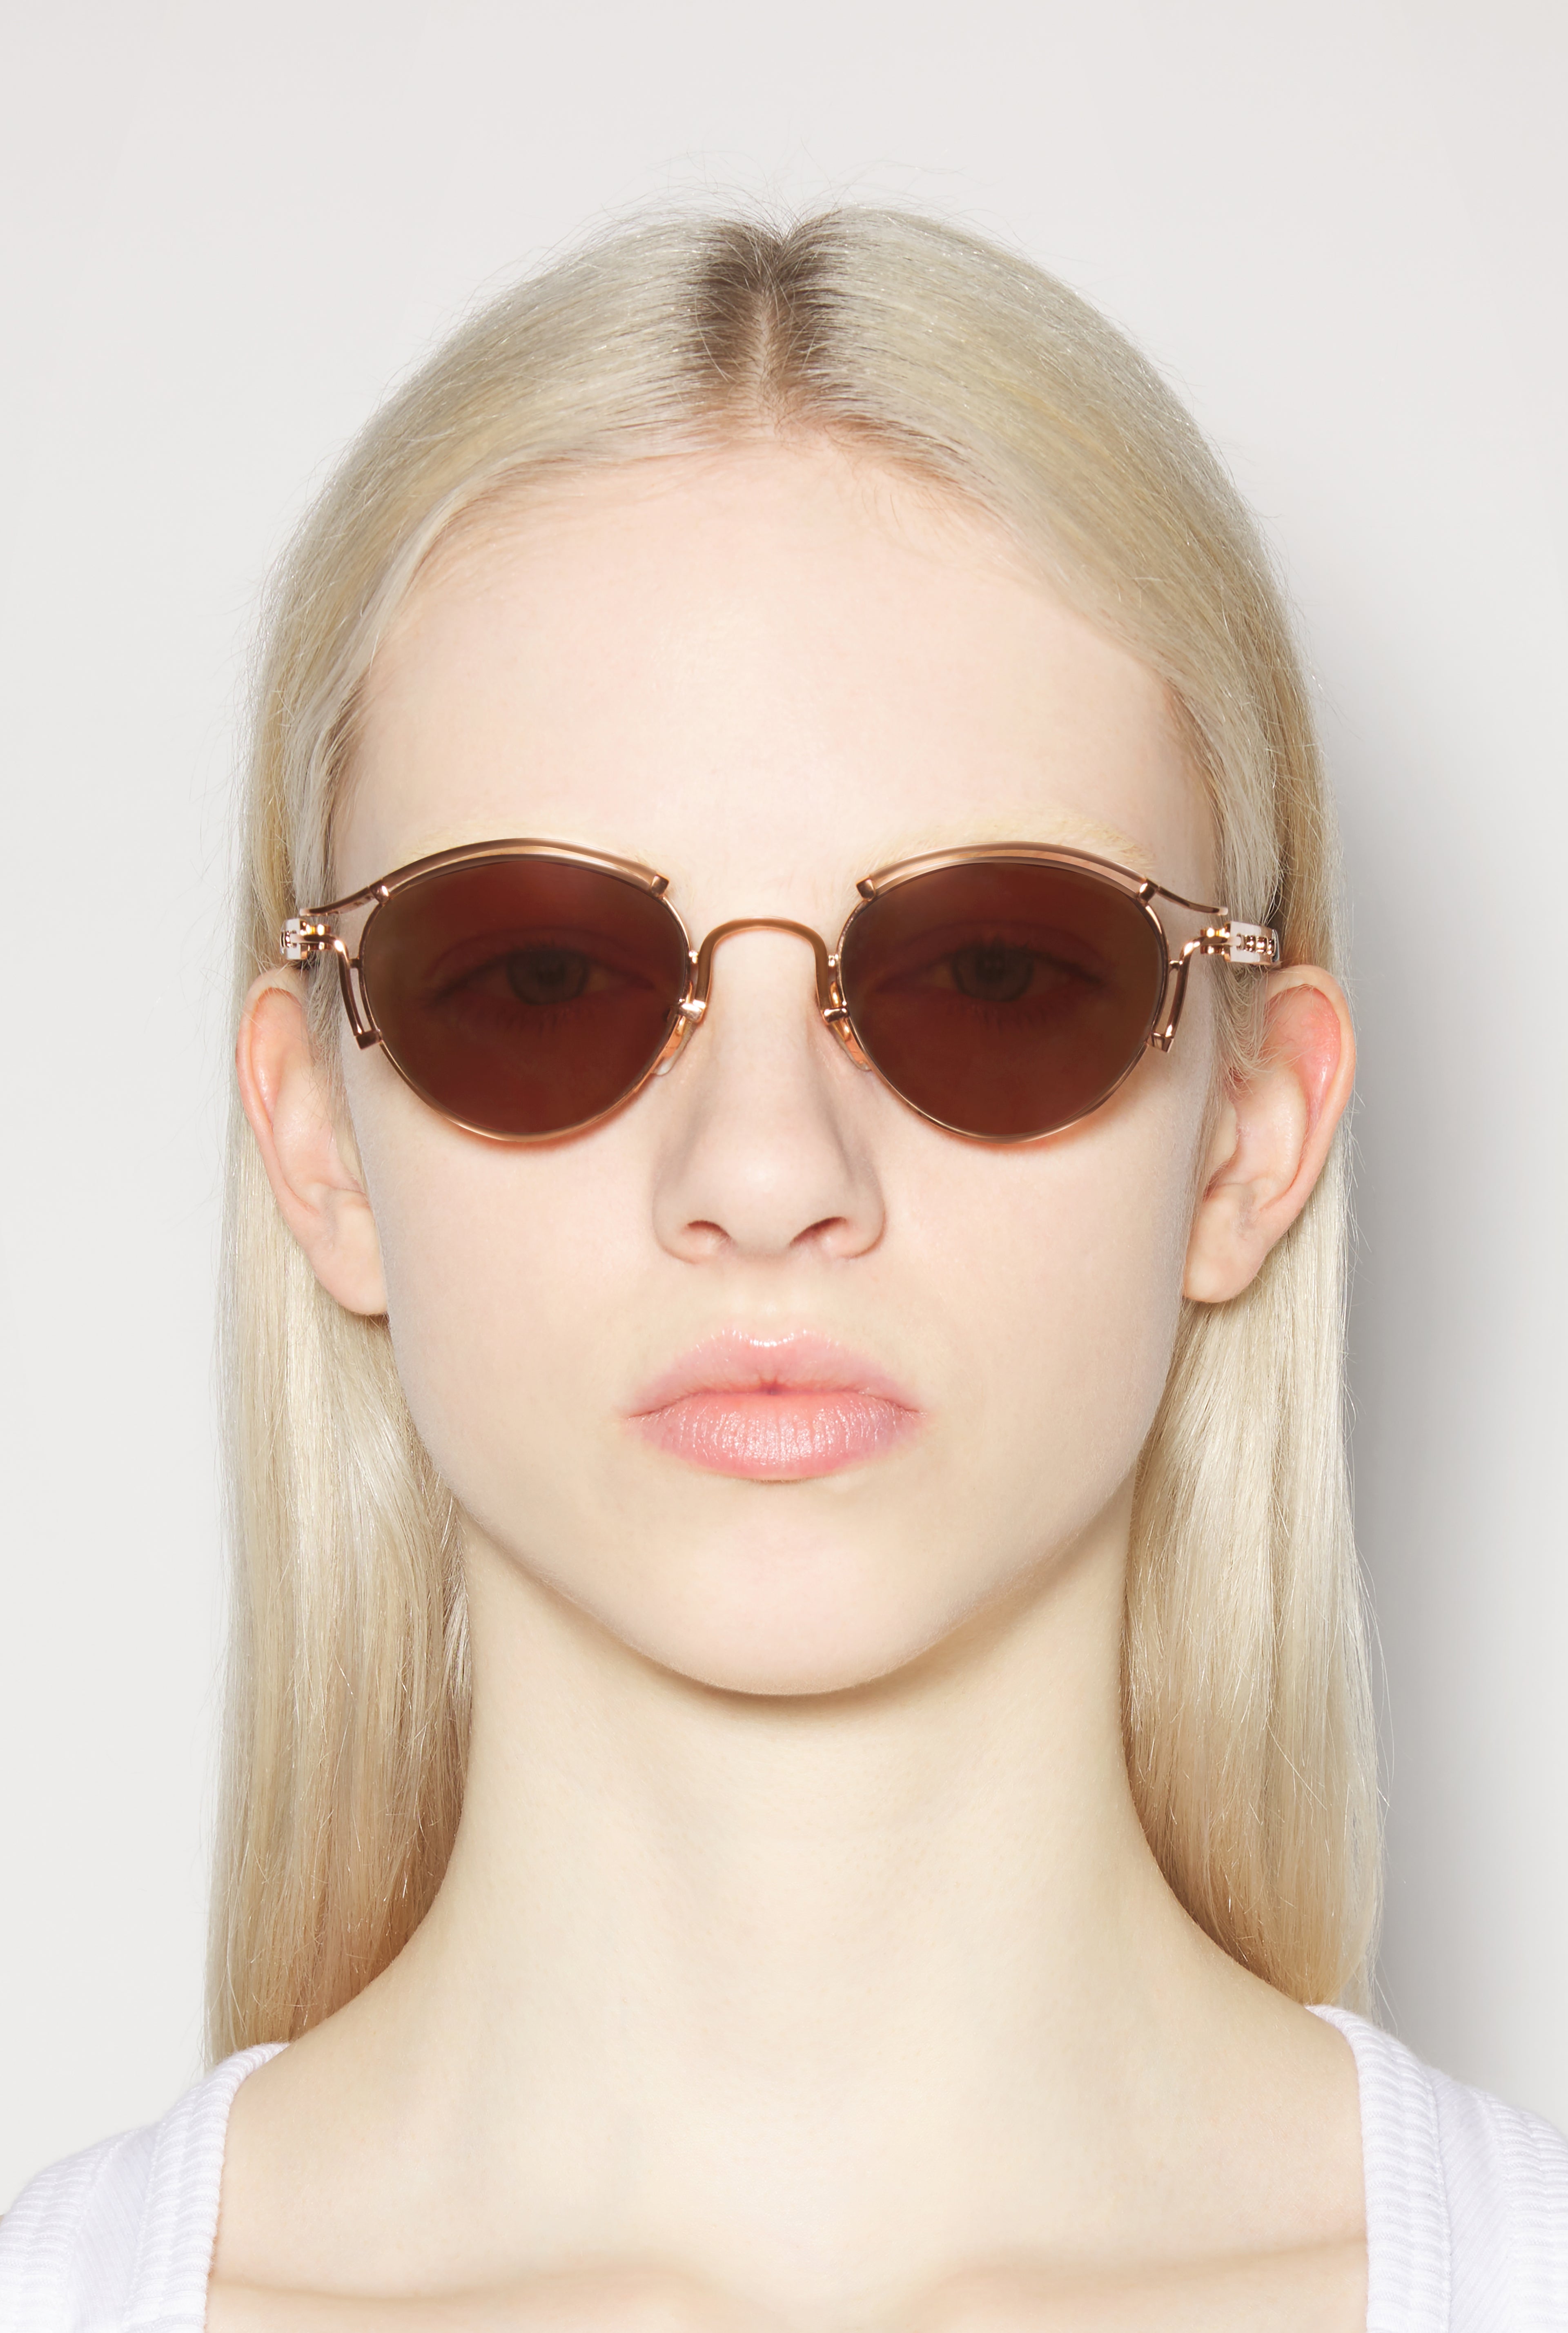 The Pink Gold 56-5102 Sunglasses